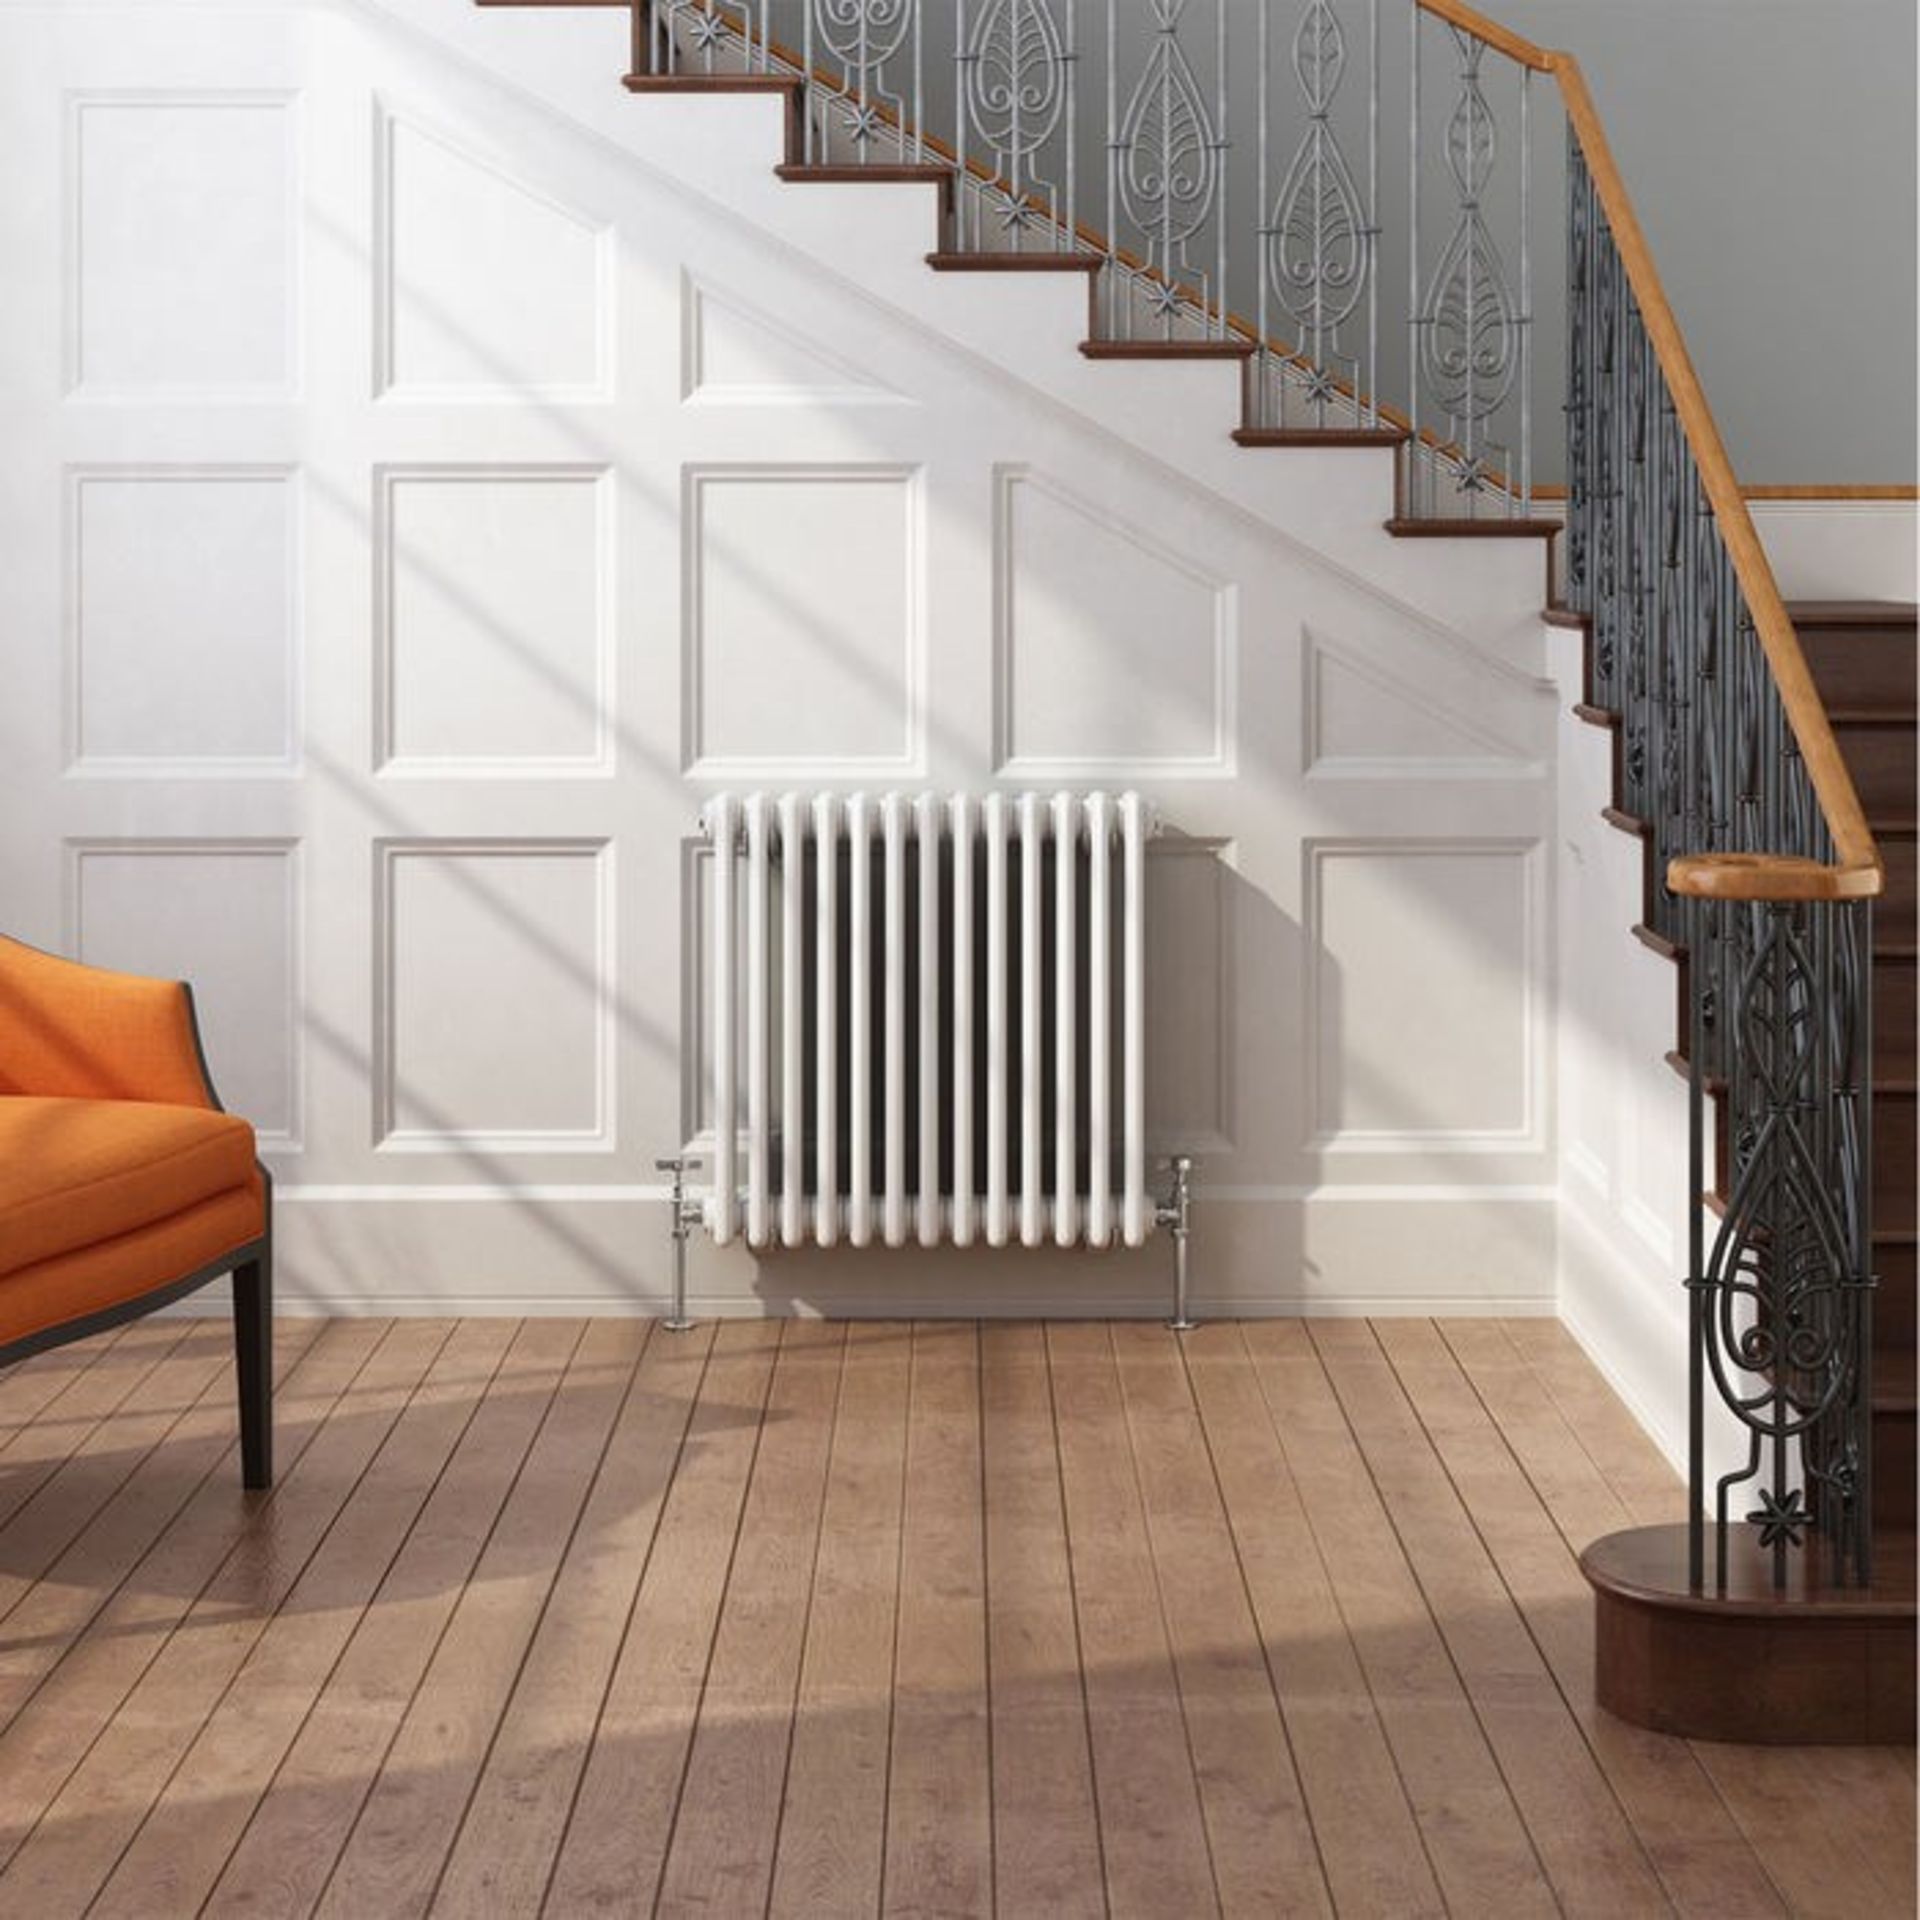 (XL40) 600x628mm White Double Panel Horizontal Colosseum Traditional Radiator. RRP £344.99.For...( - Image 2 of 2